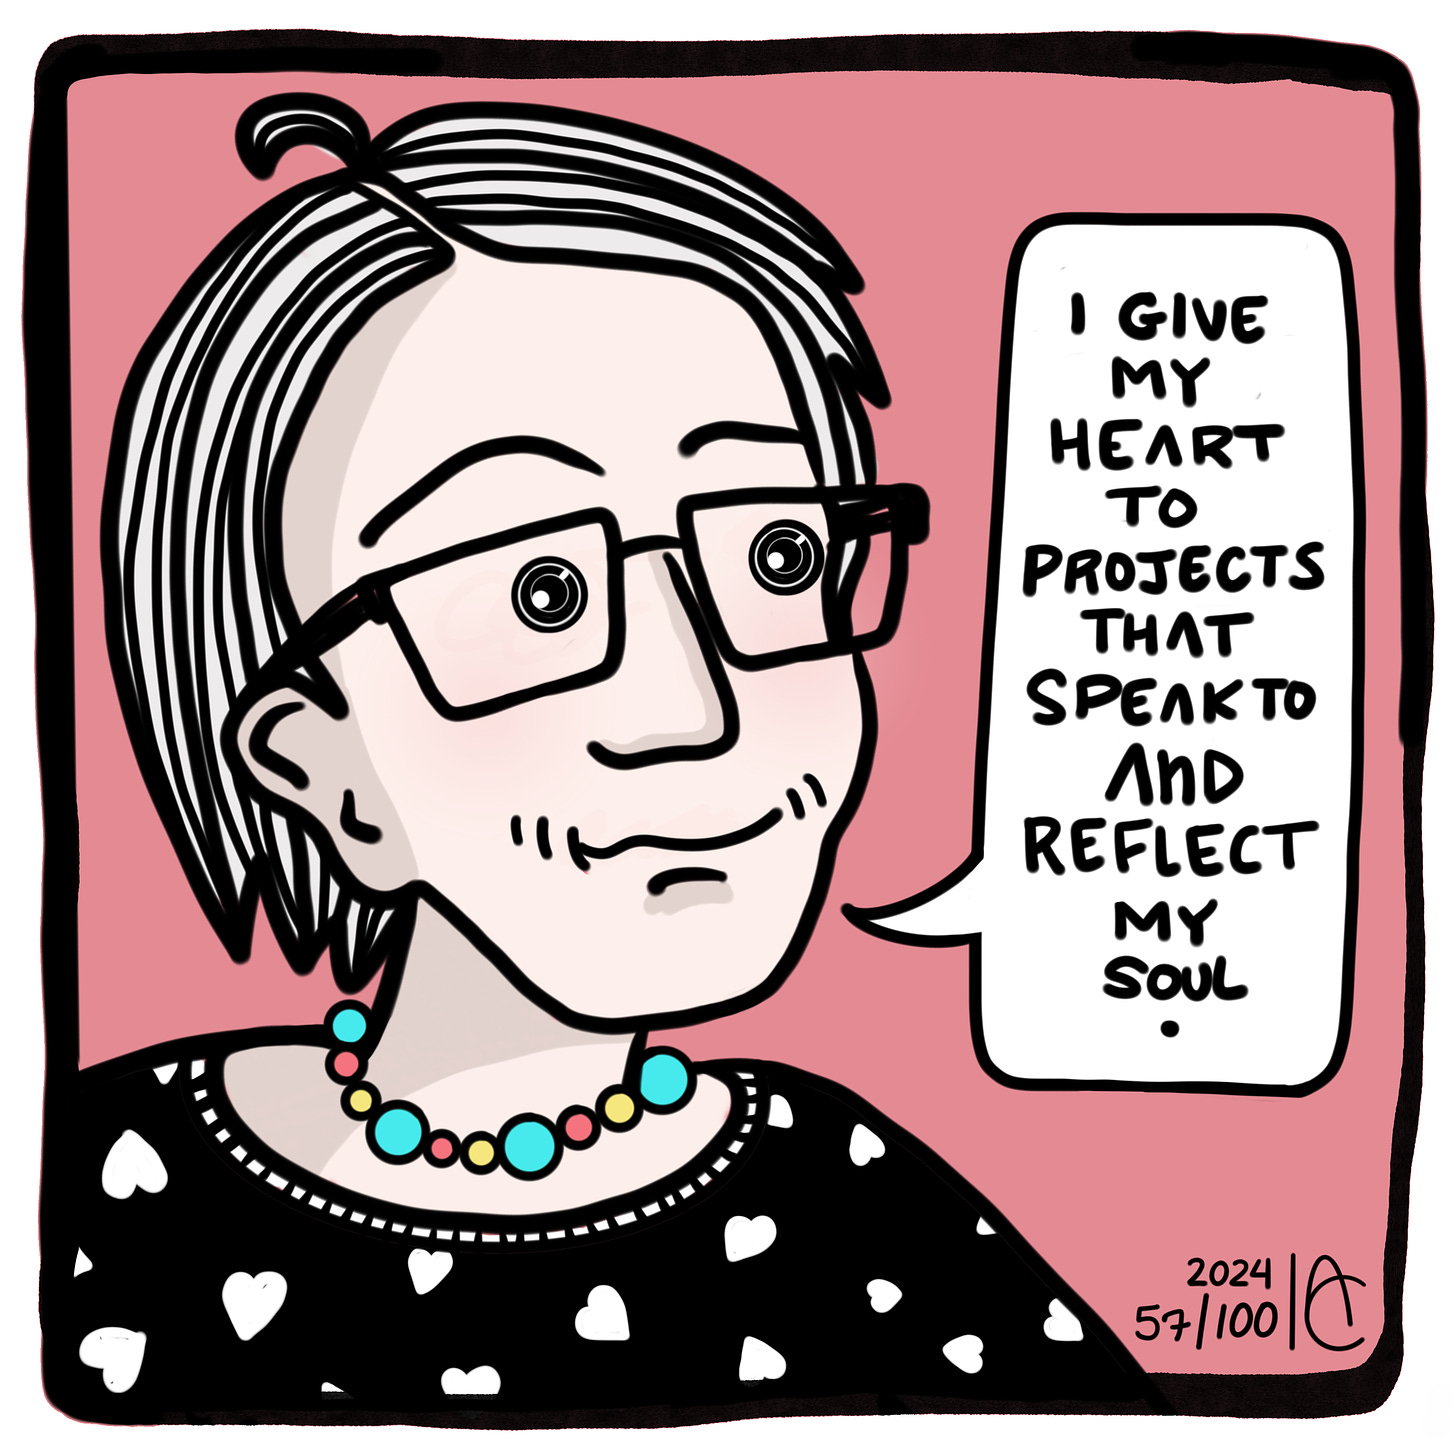 57/100:  I give my heart to projects that speak to and reflect my soul. Diary comic affirmation - A Cowen